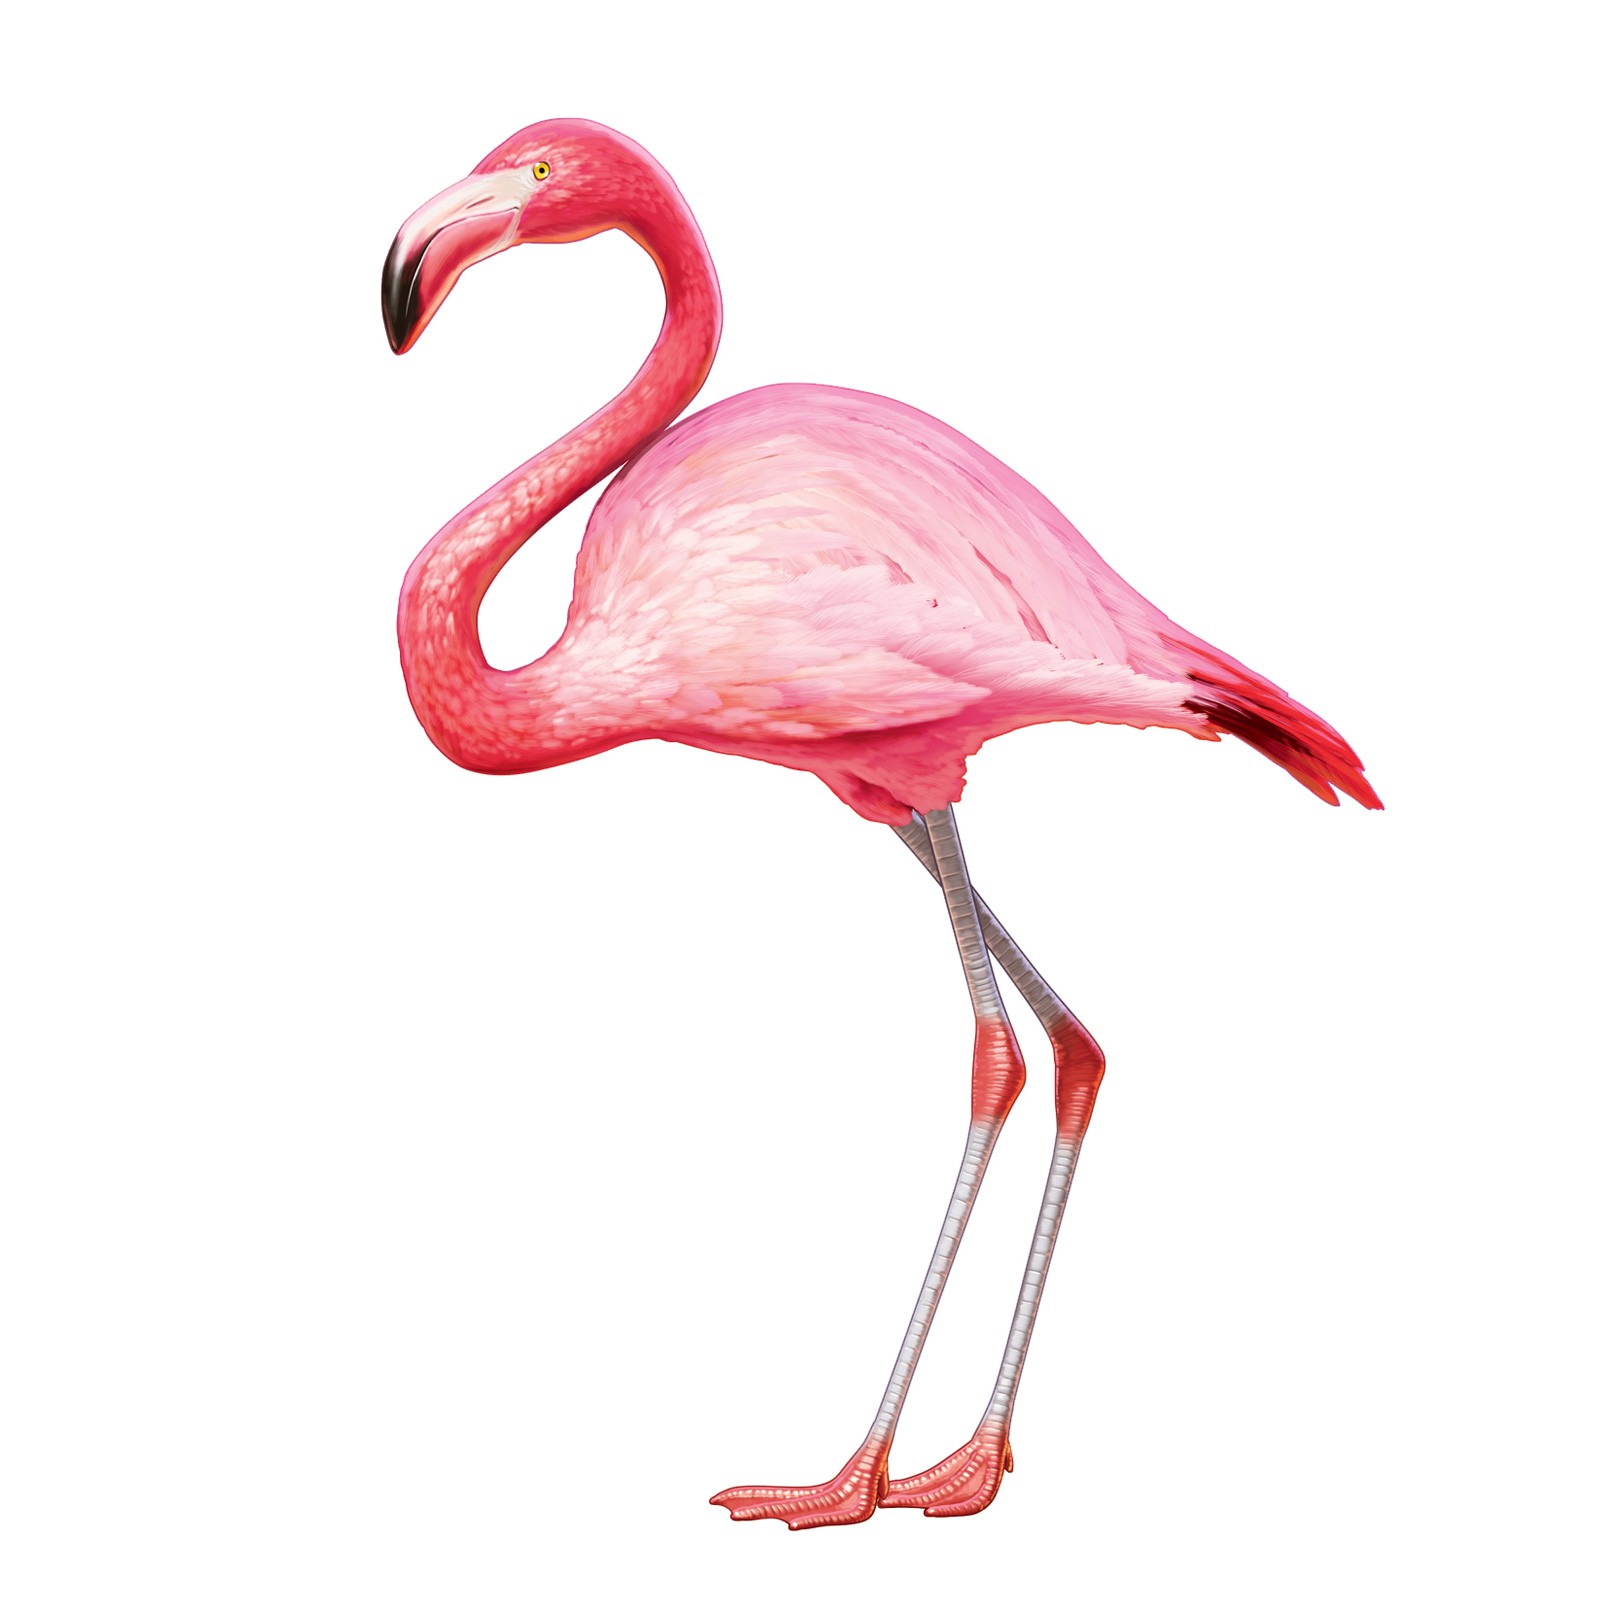 Flamingo history and some interesting facts